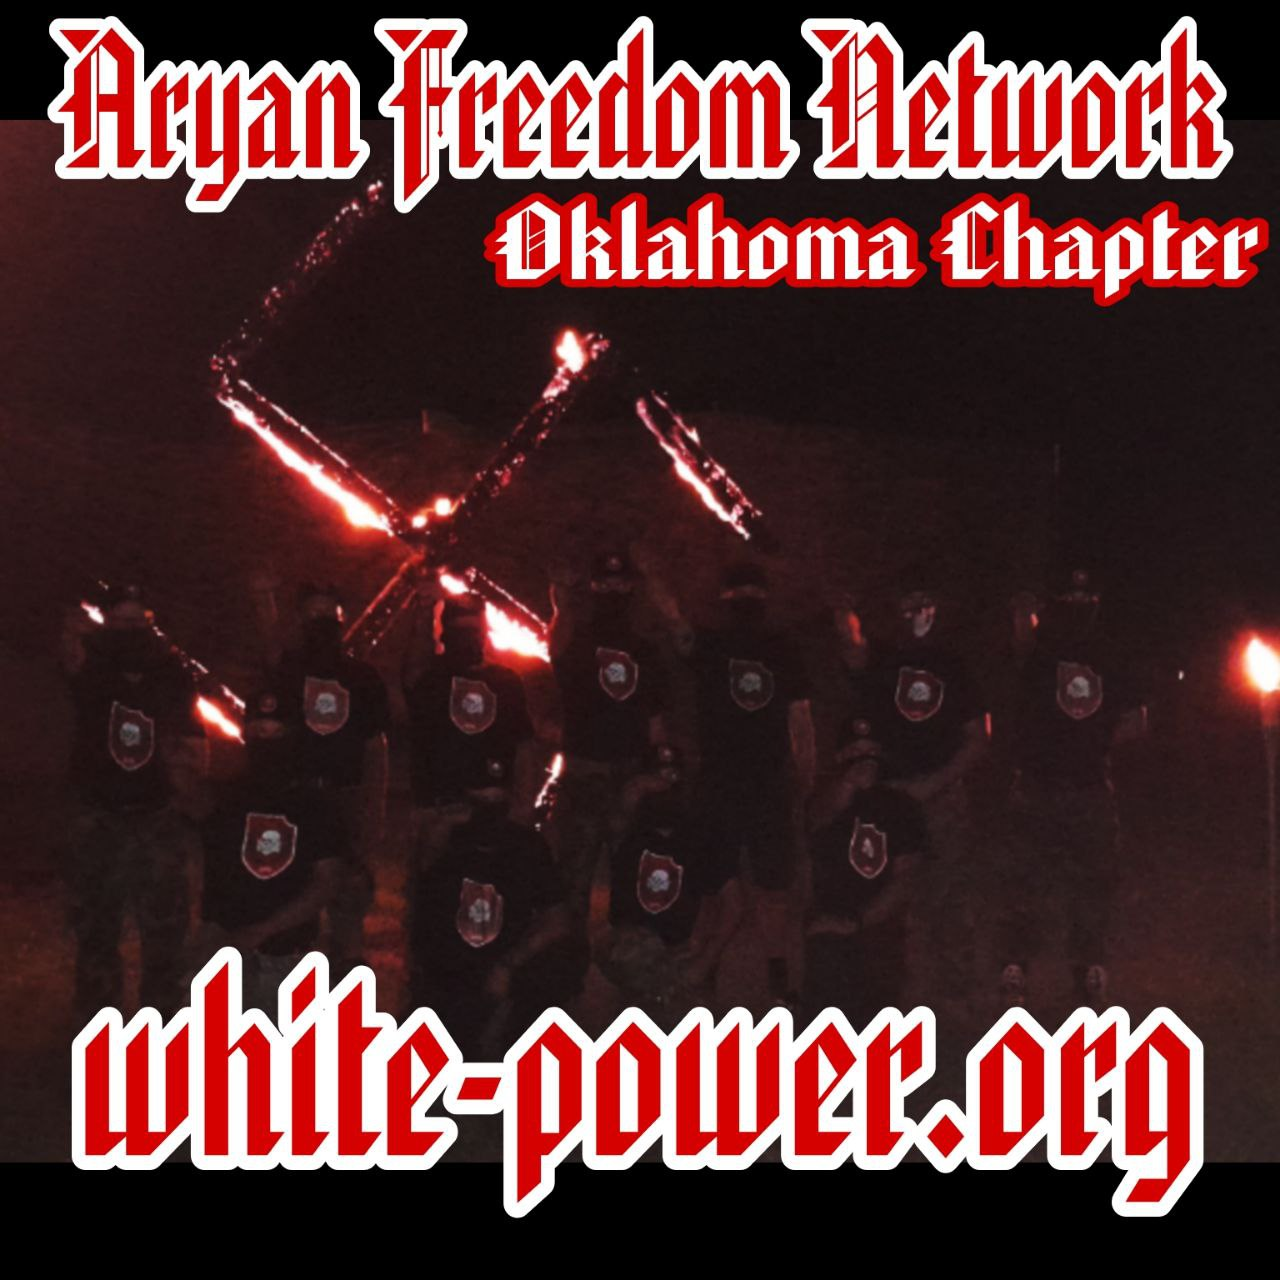 (Right Wing Extremism/Poster) Aryan Freedom Network (AFN) Circulates Poster Featuring the Oklahoma Chapter, United States - 22 June 2023